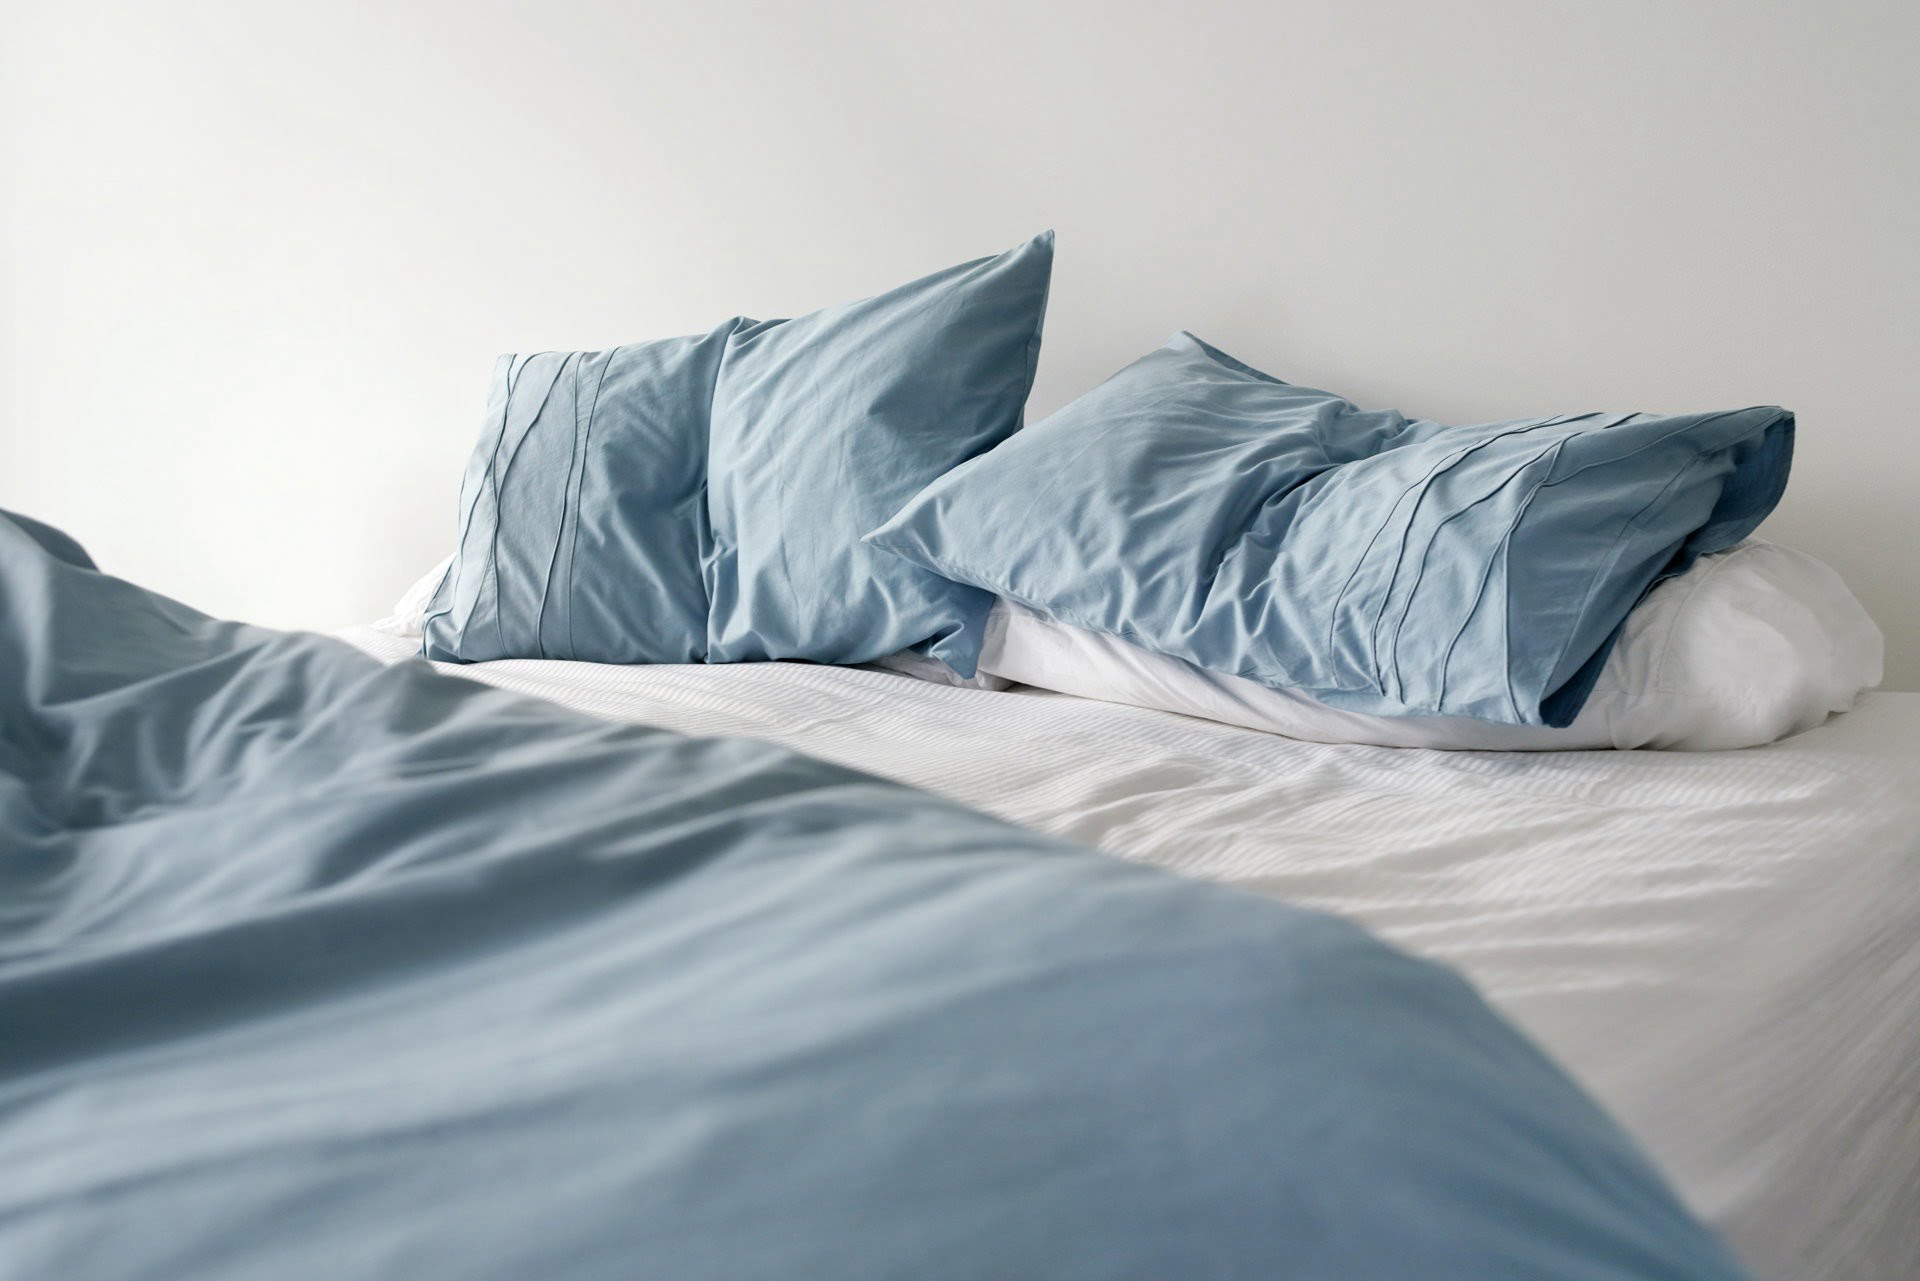 Why You Should Make Your Bed in the Morning